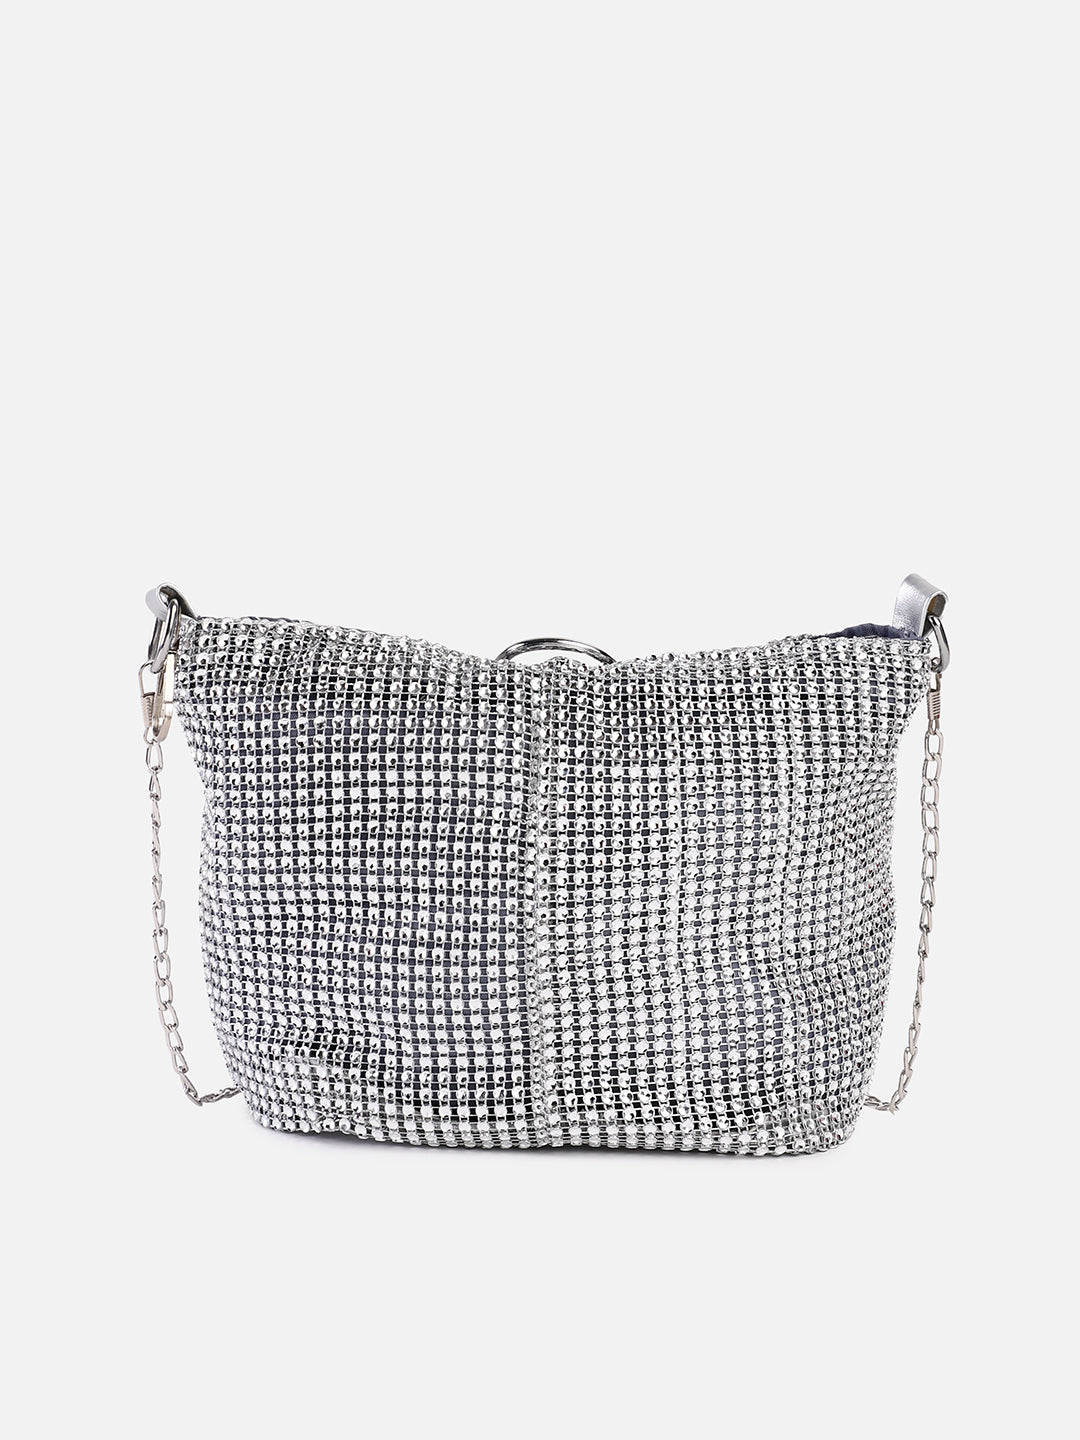 Hilary Silver Tote Bag